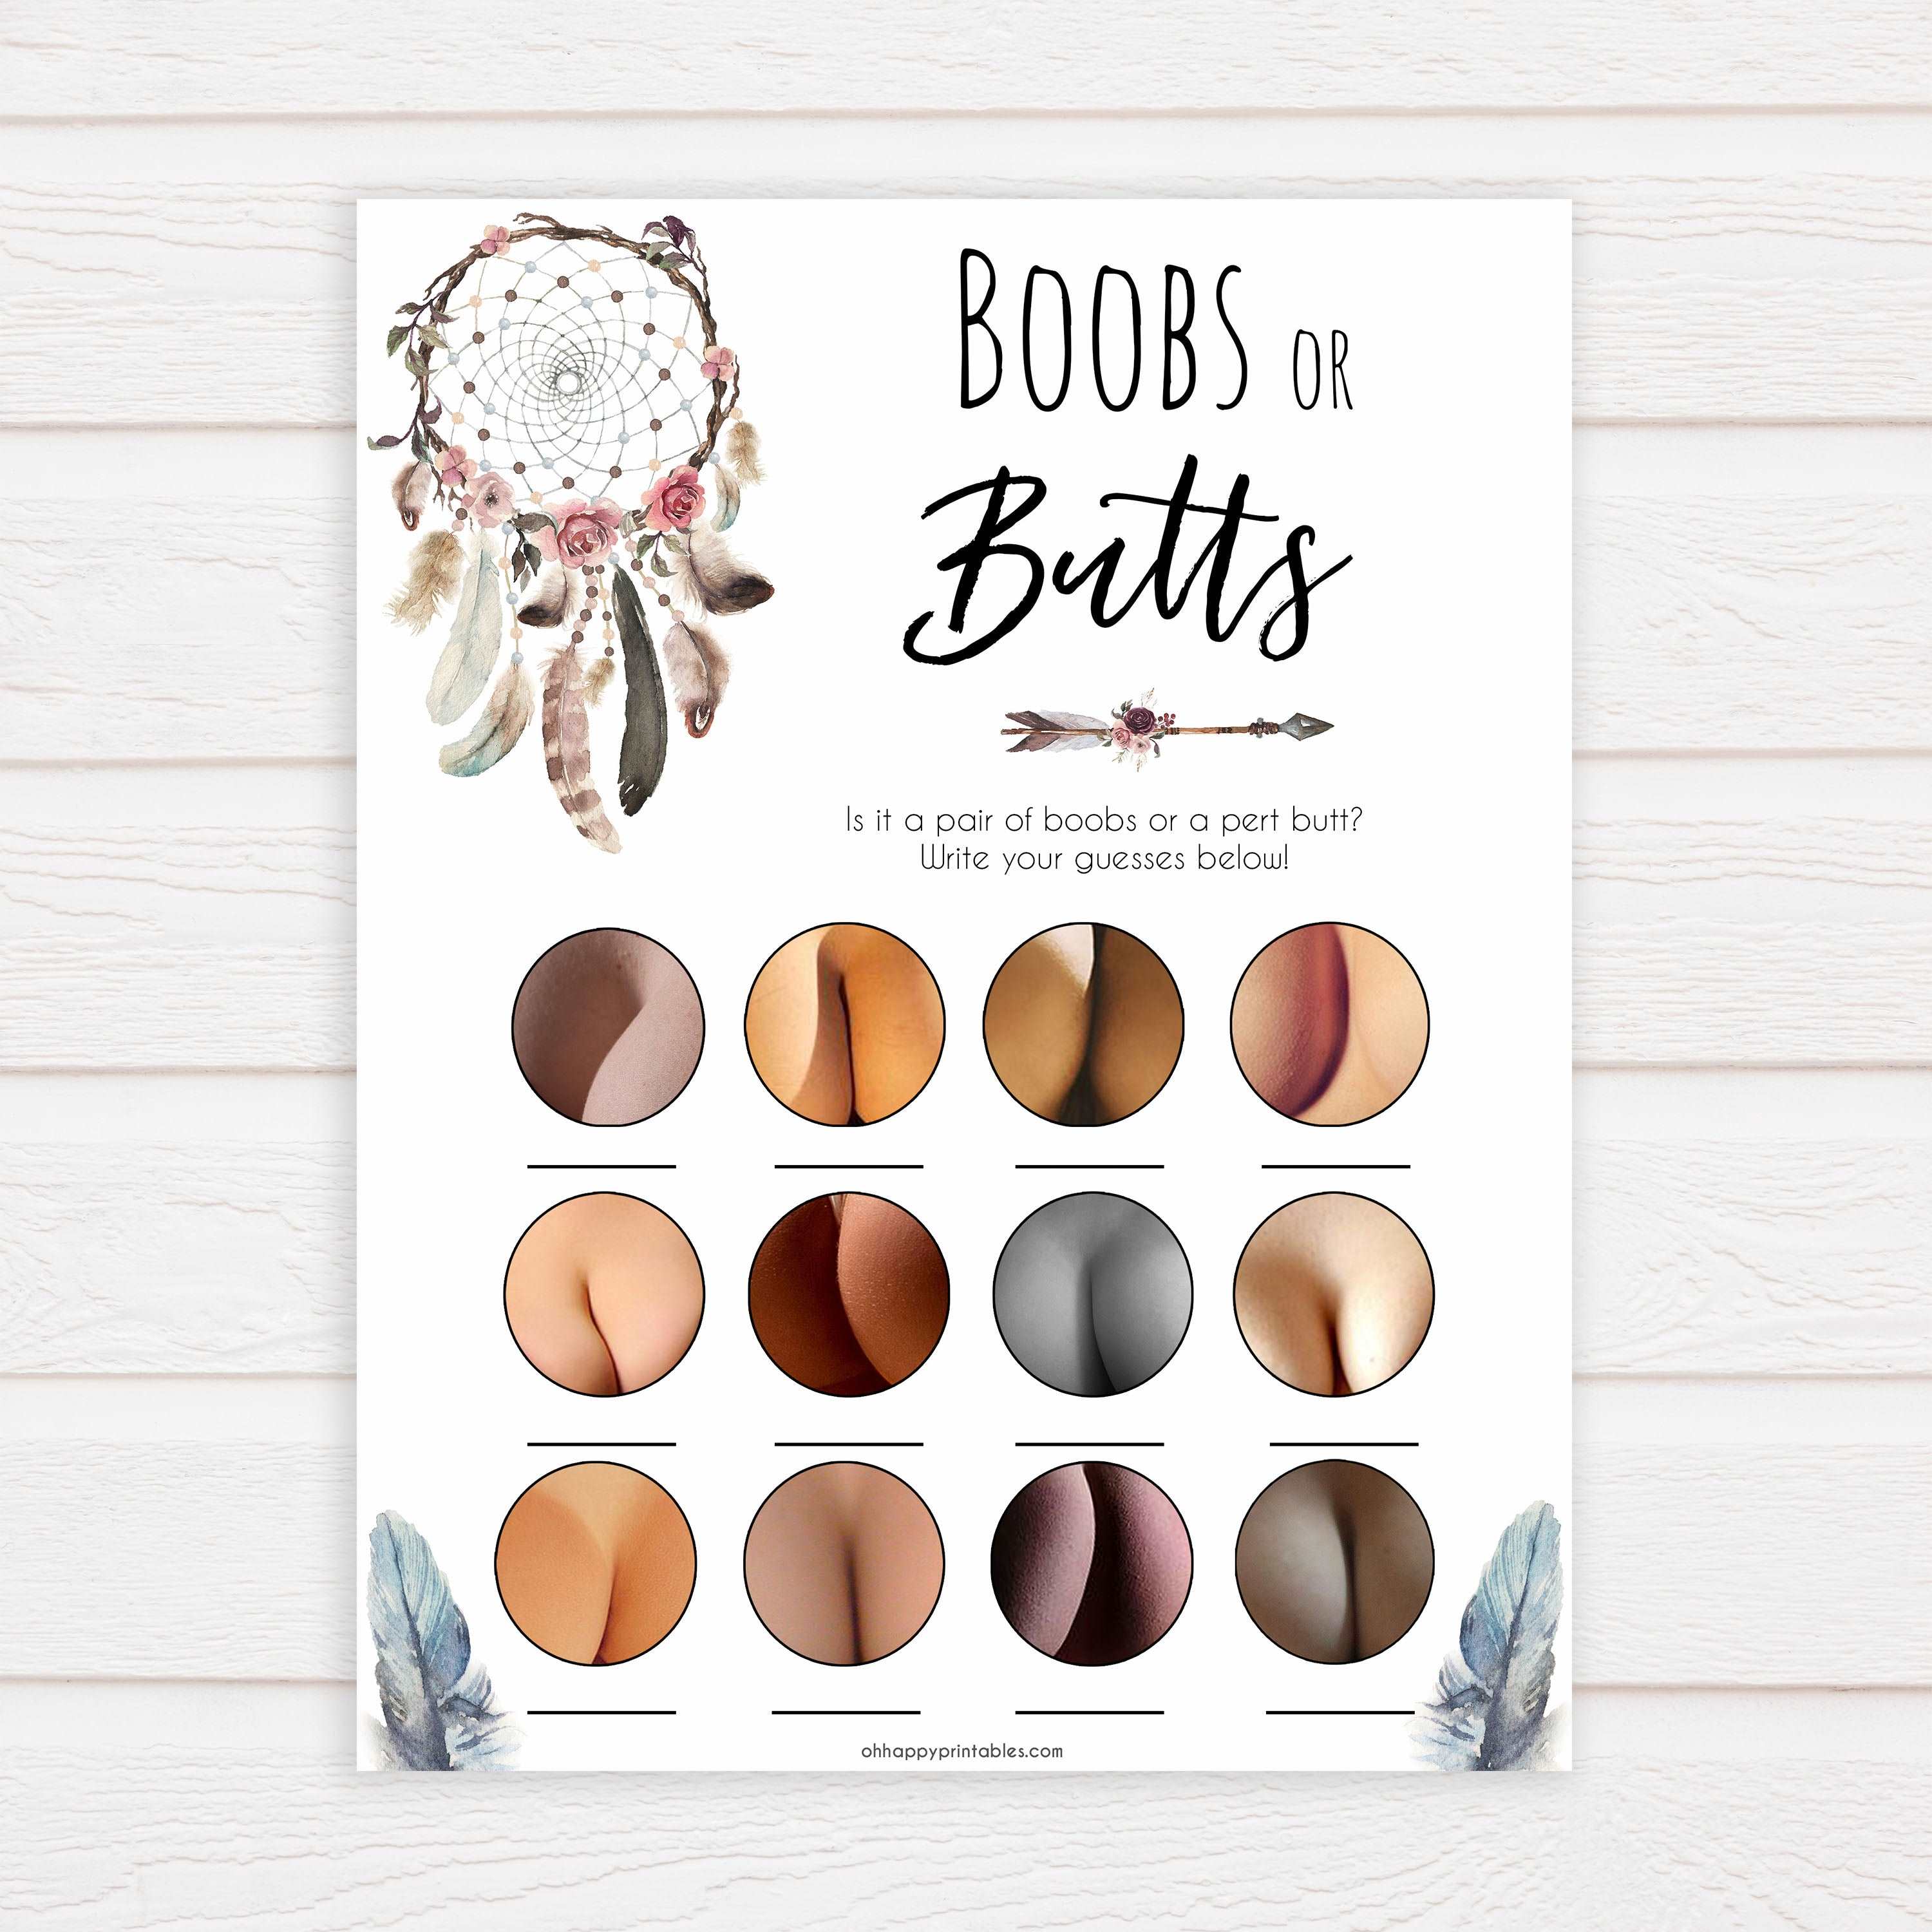 labor or porn, baby bump or beer belly, boobs or butts games, Printable baby shower games, boho baby shower games, dreamcatcher baby games, fun baby shower games, top baby shower ideas